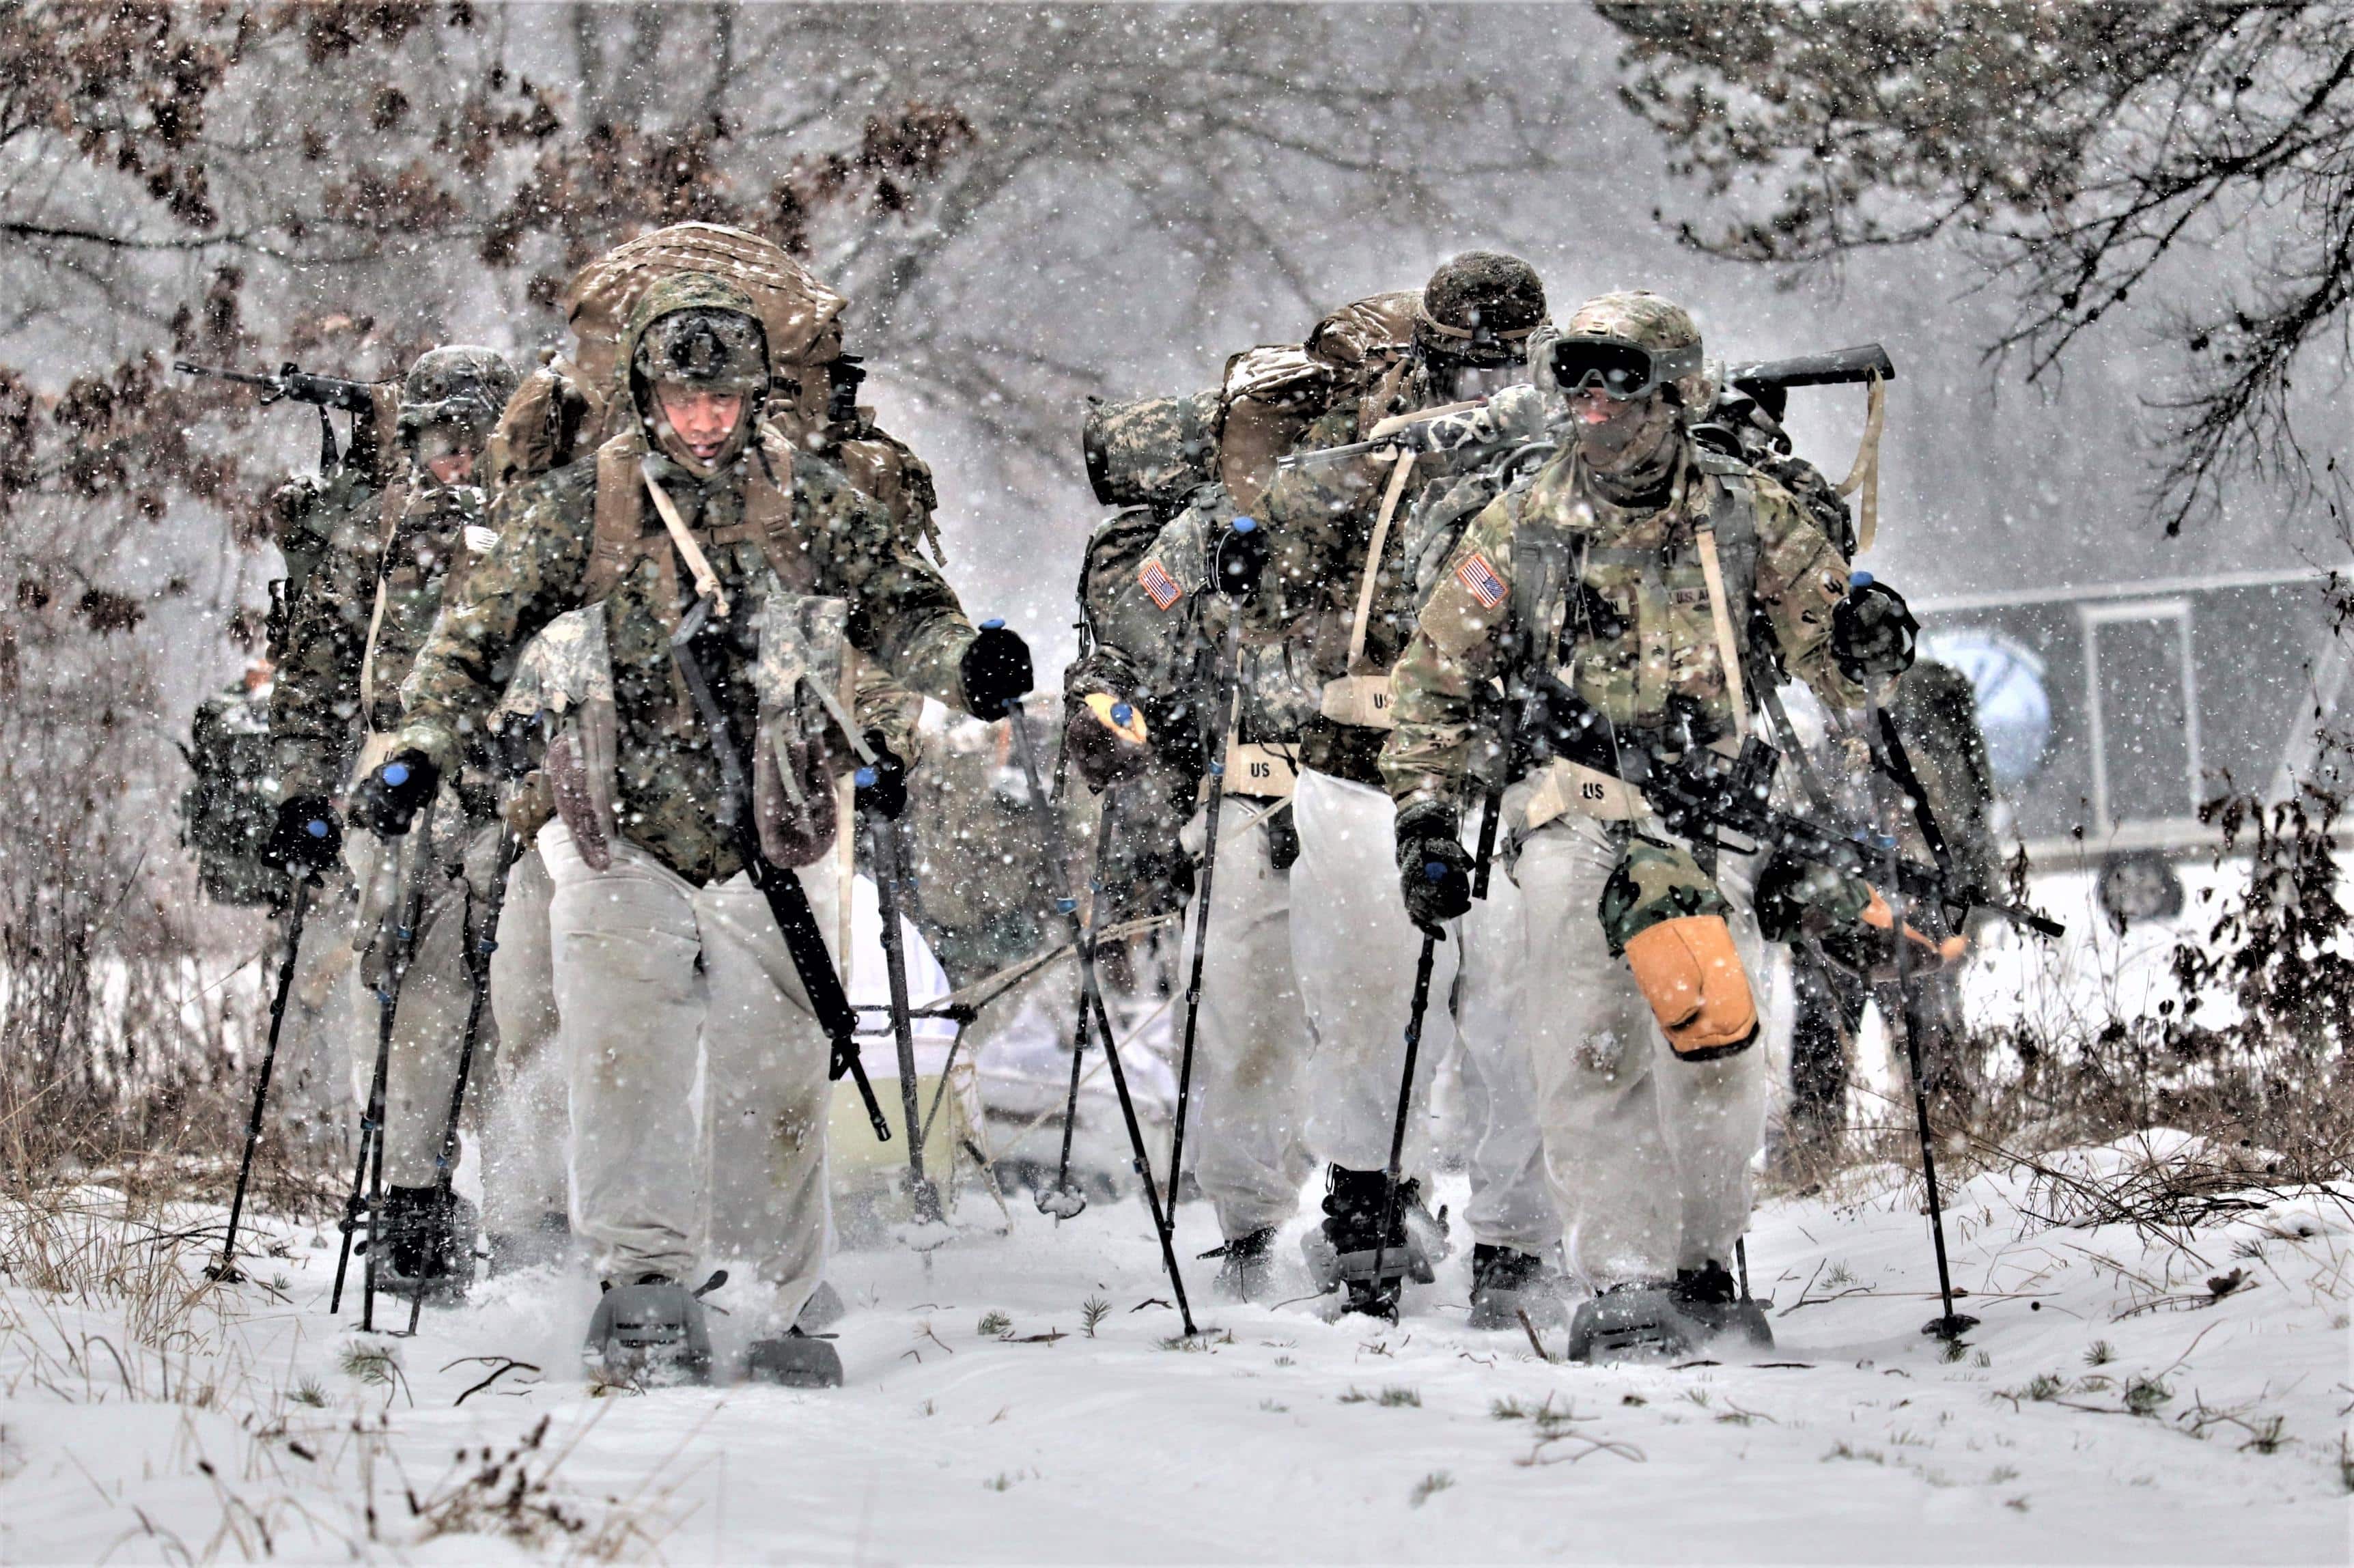 Students, who include Army Reserve Soldiers, in Cold-Weather Operations Course Class 20-01 move through the snow and terrain on snowshoes during training Dec. 12, 2019, on North Post at Fort McCoy, Wis. CWOC students are trained on a variety of cold-weather subjects